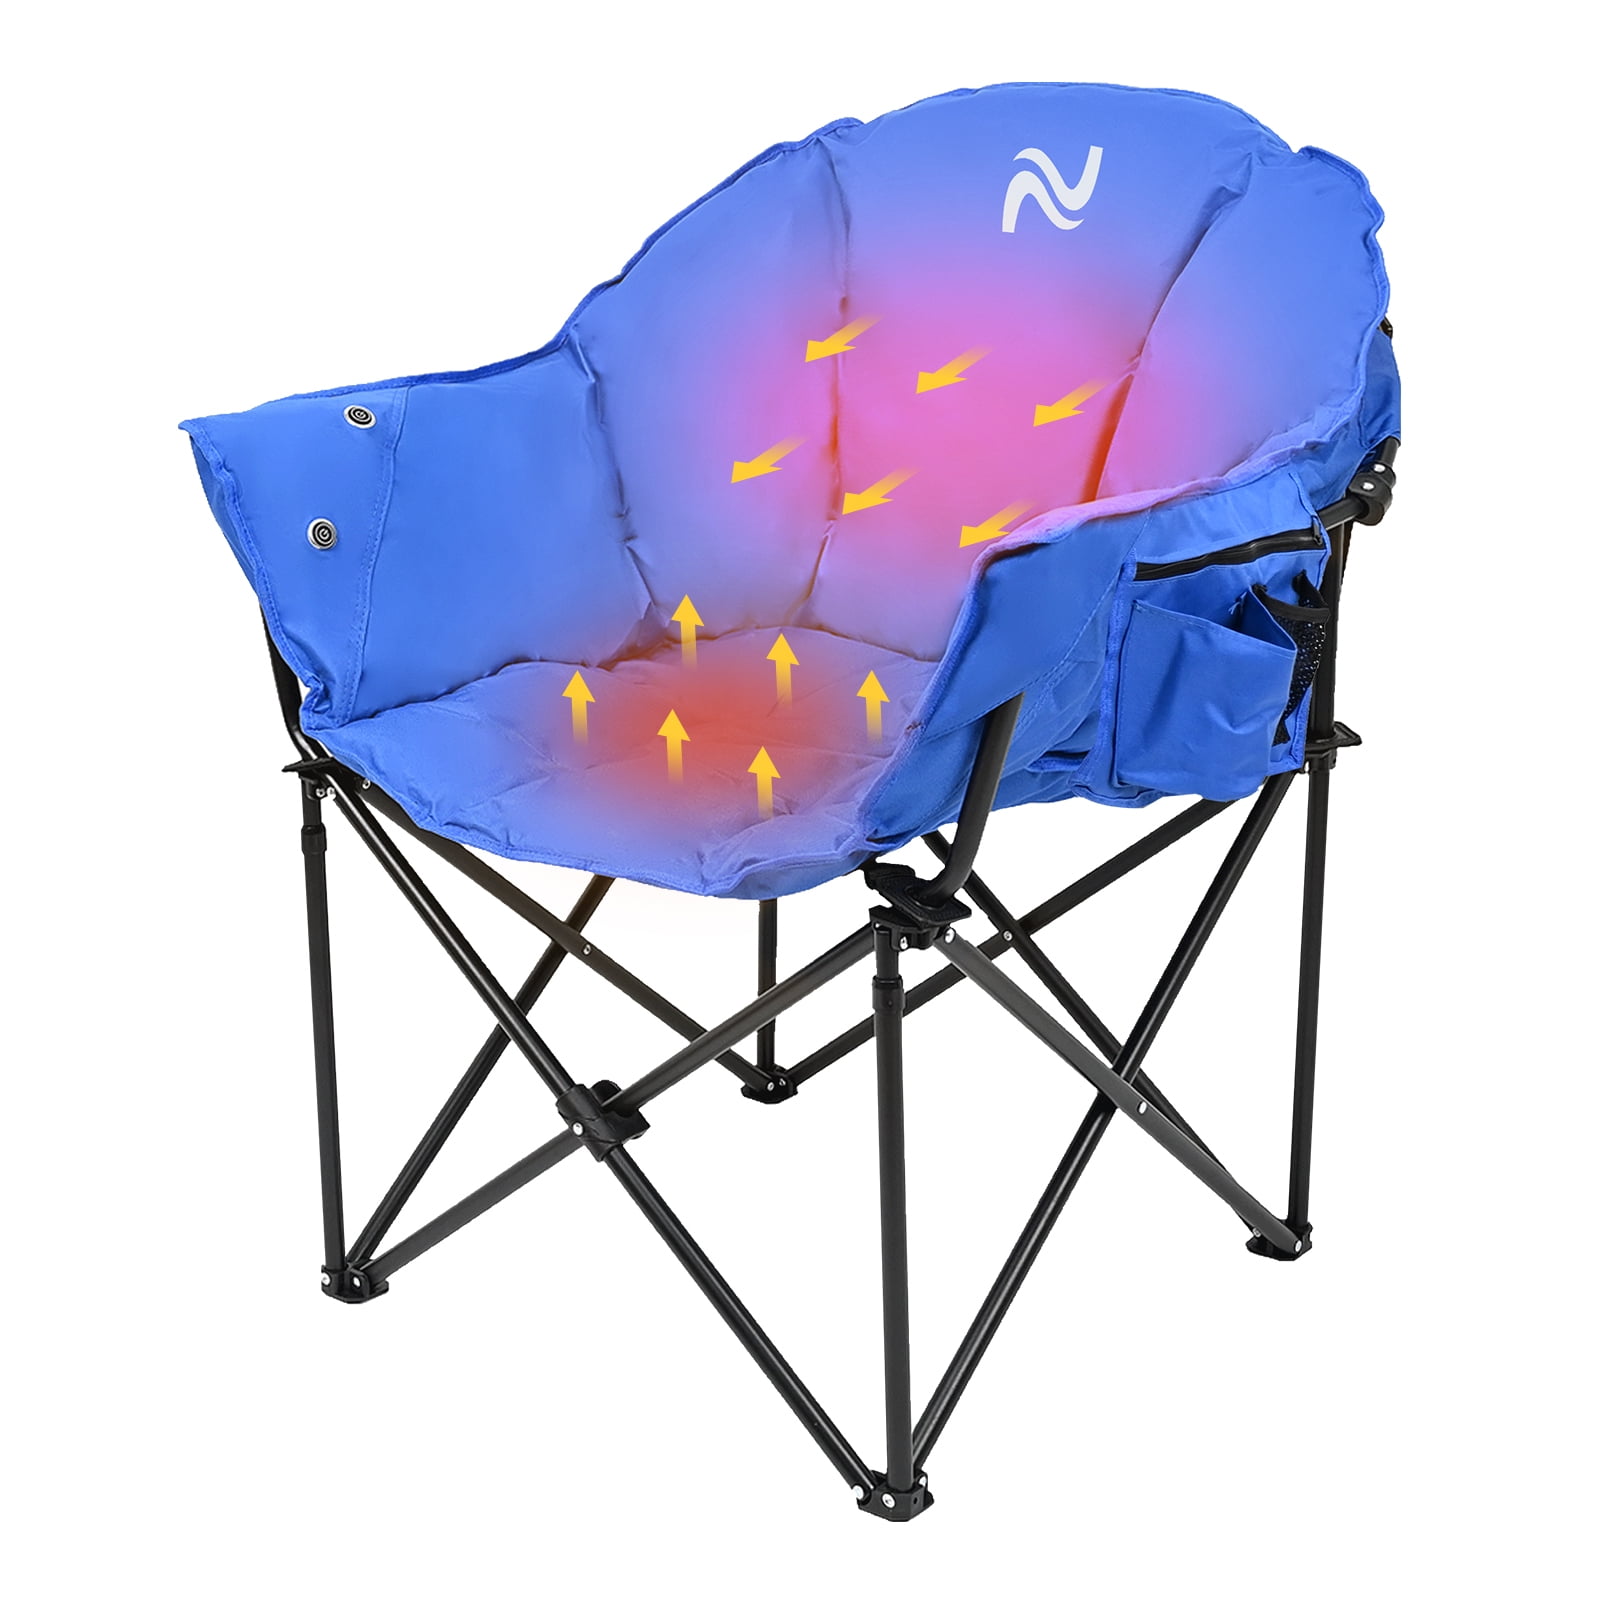 NAIZEA Heated Camping Chair Oversized, Outdoor Portable Folding